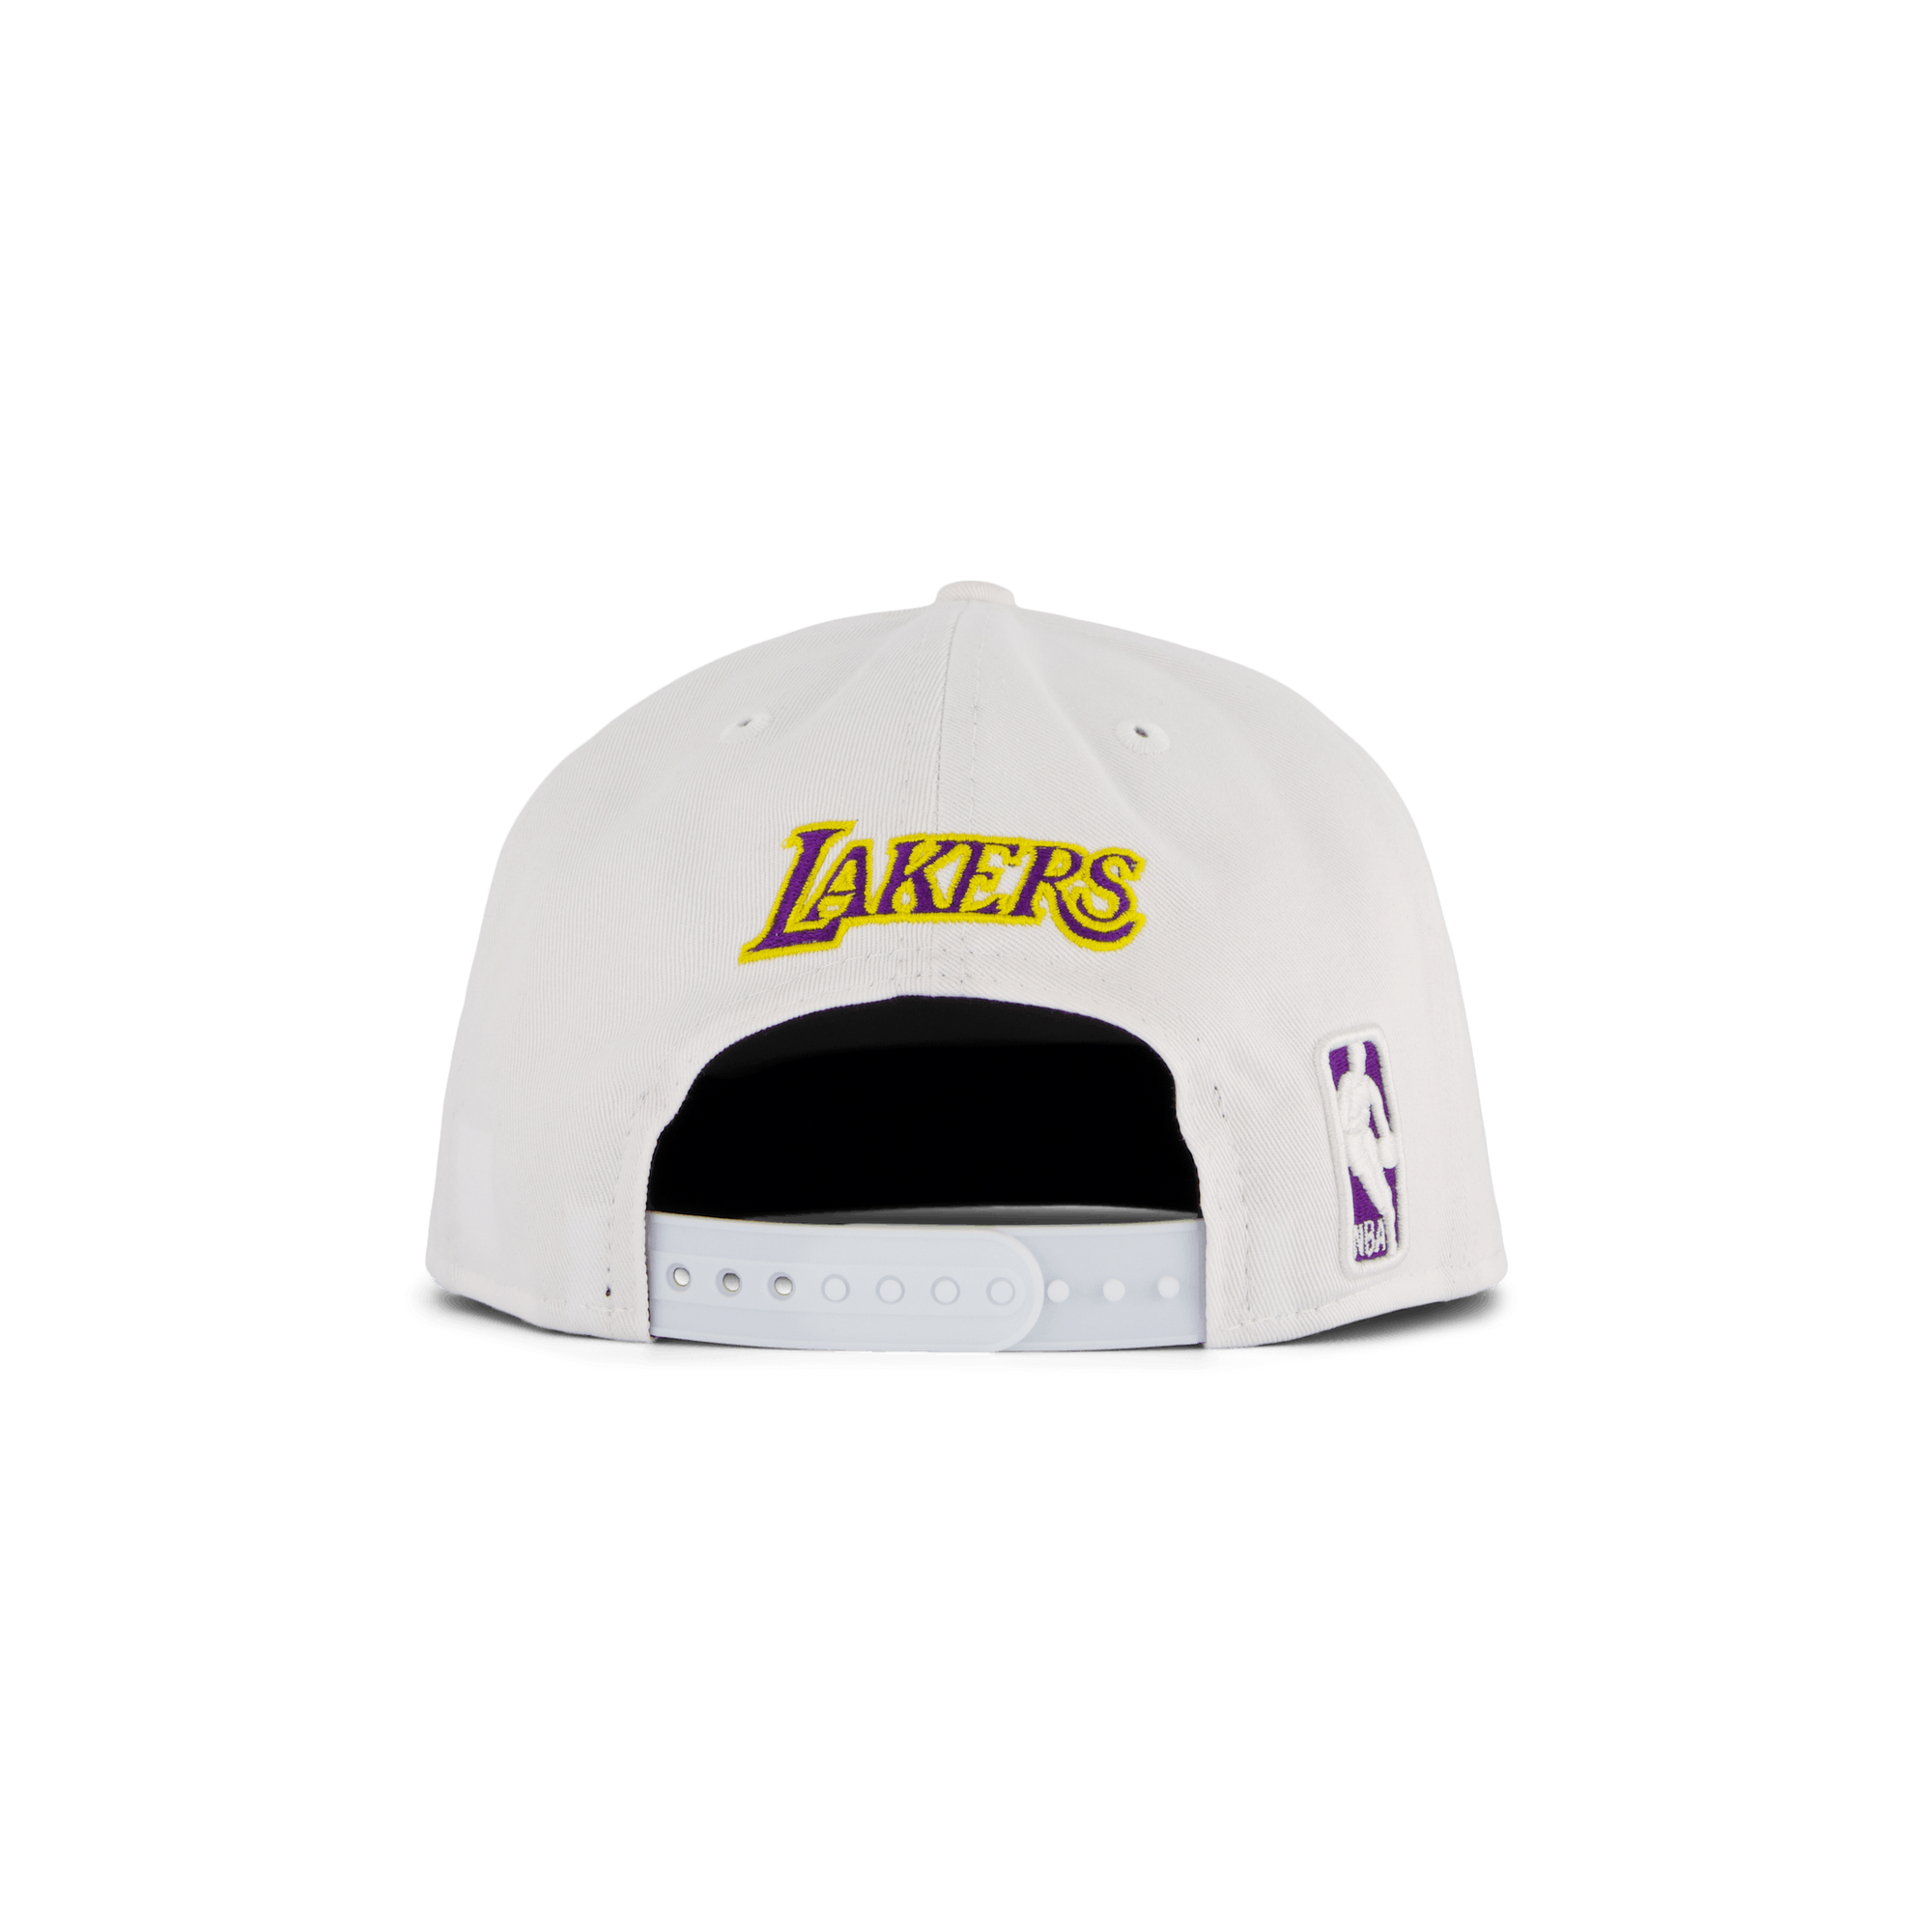 Wht Crown Team 9fifty Lakers Whitrp